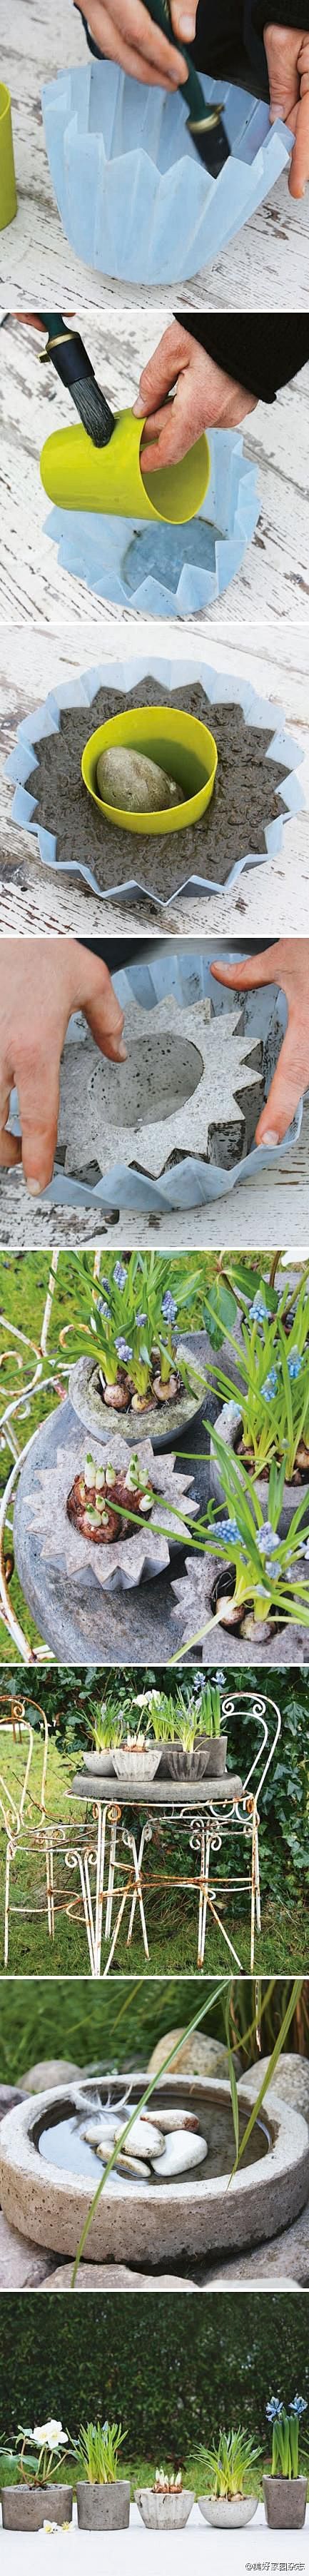 make your own plante...